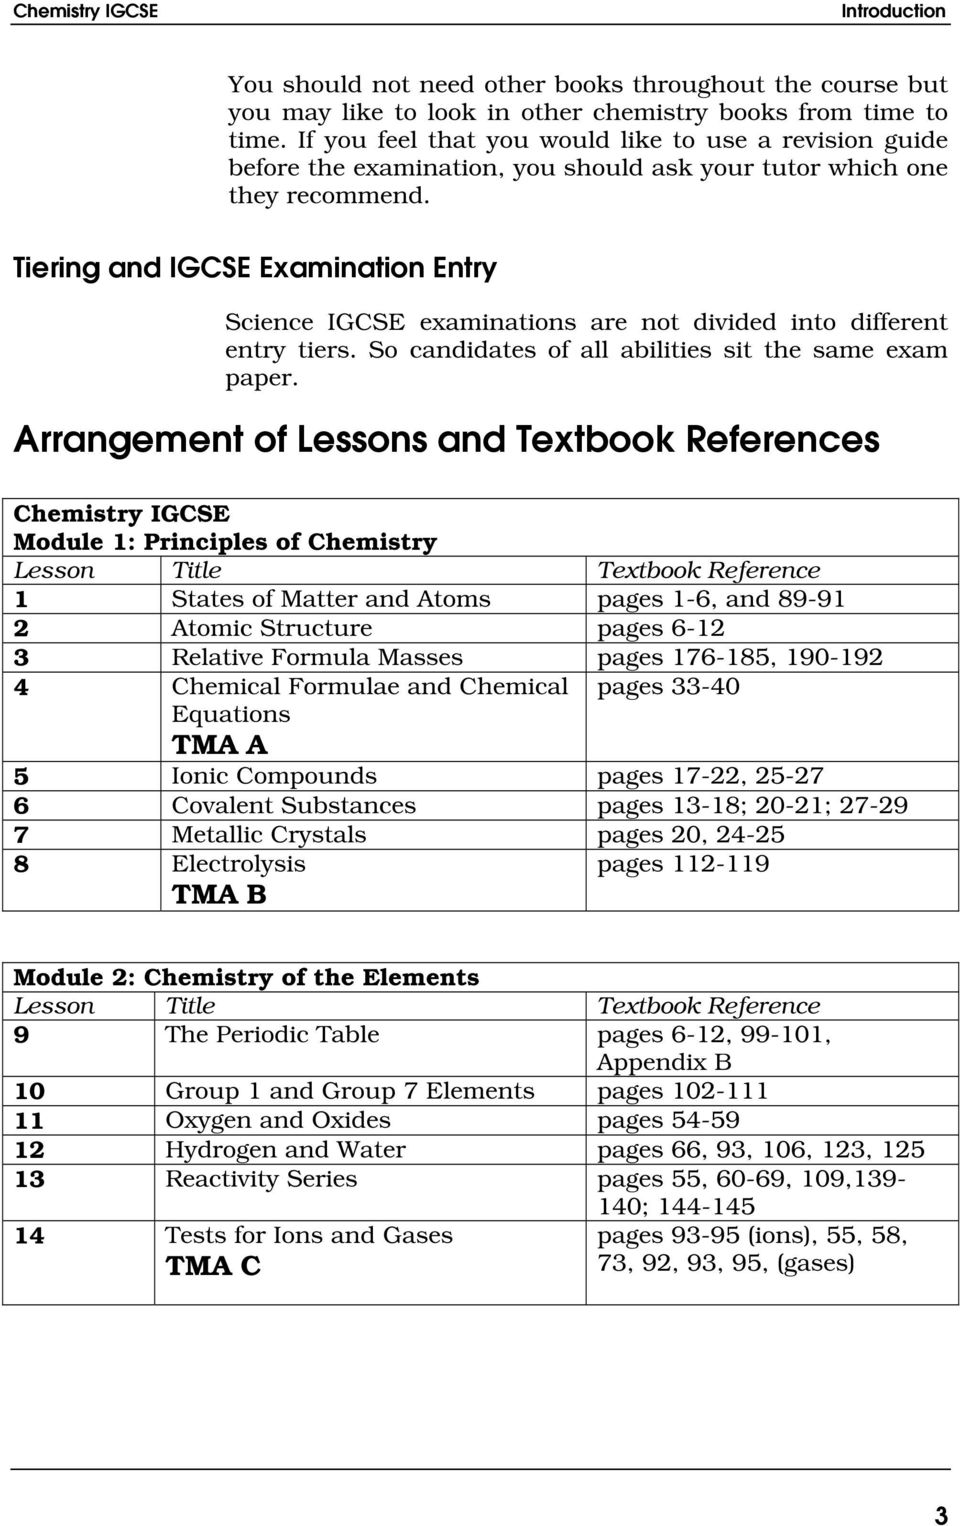 Tiering and IGCSE Examination Entry Science IGCSE examinations are not divided into different entry tiers. So candidates of all abilities sit the same exam paper.